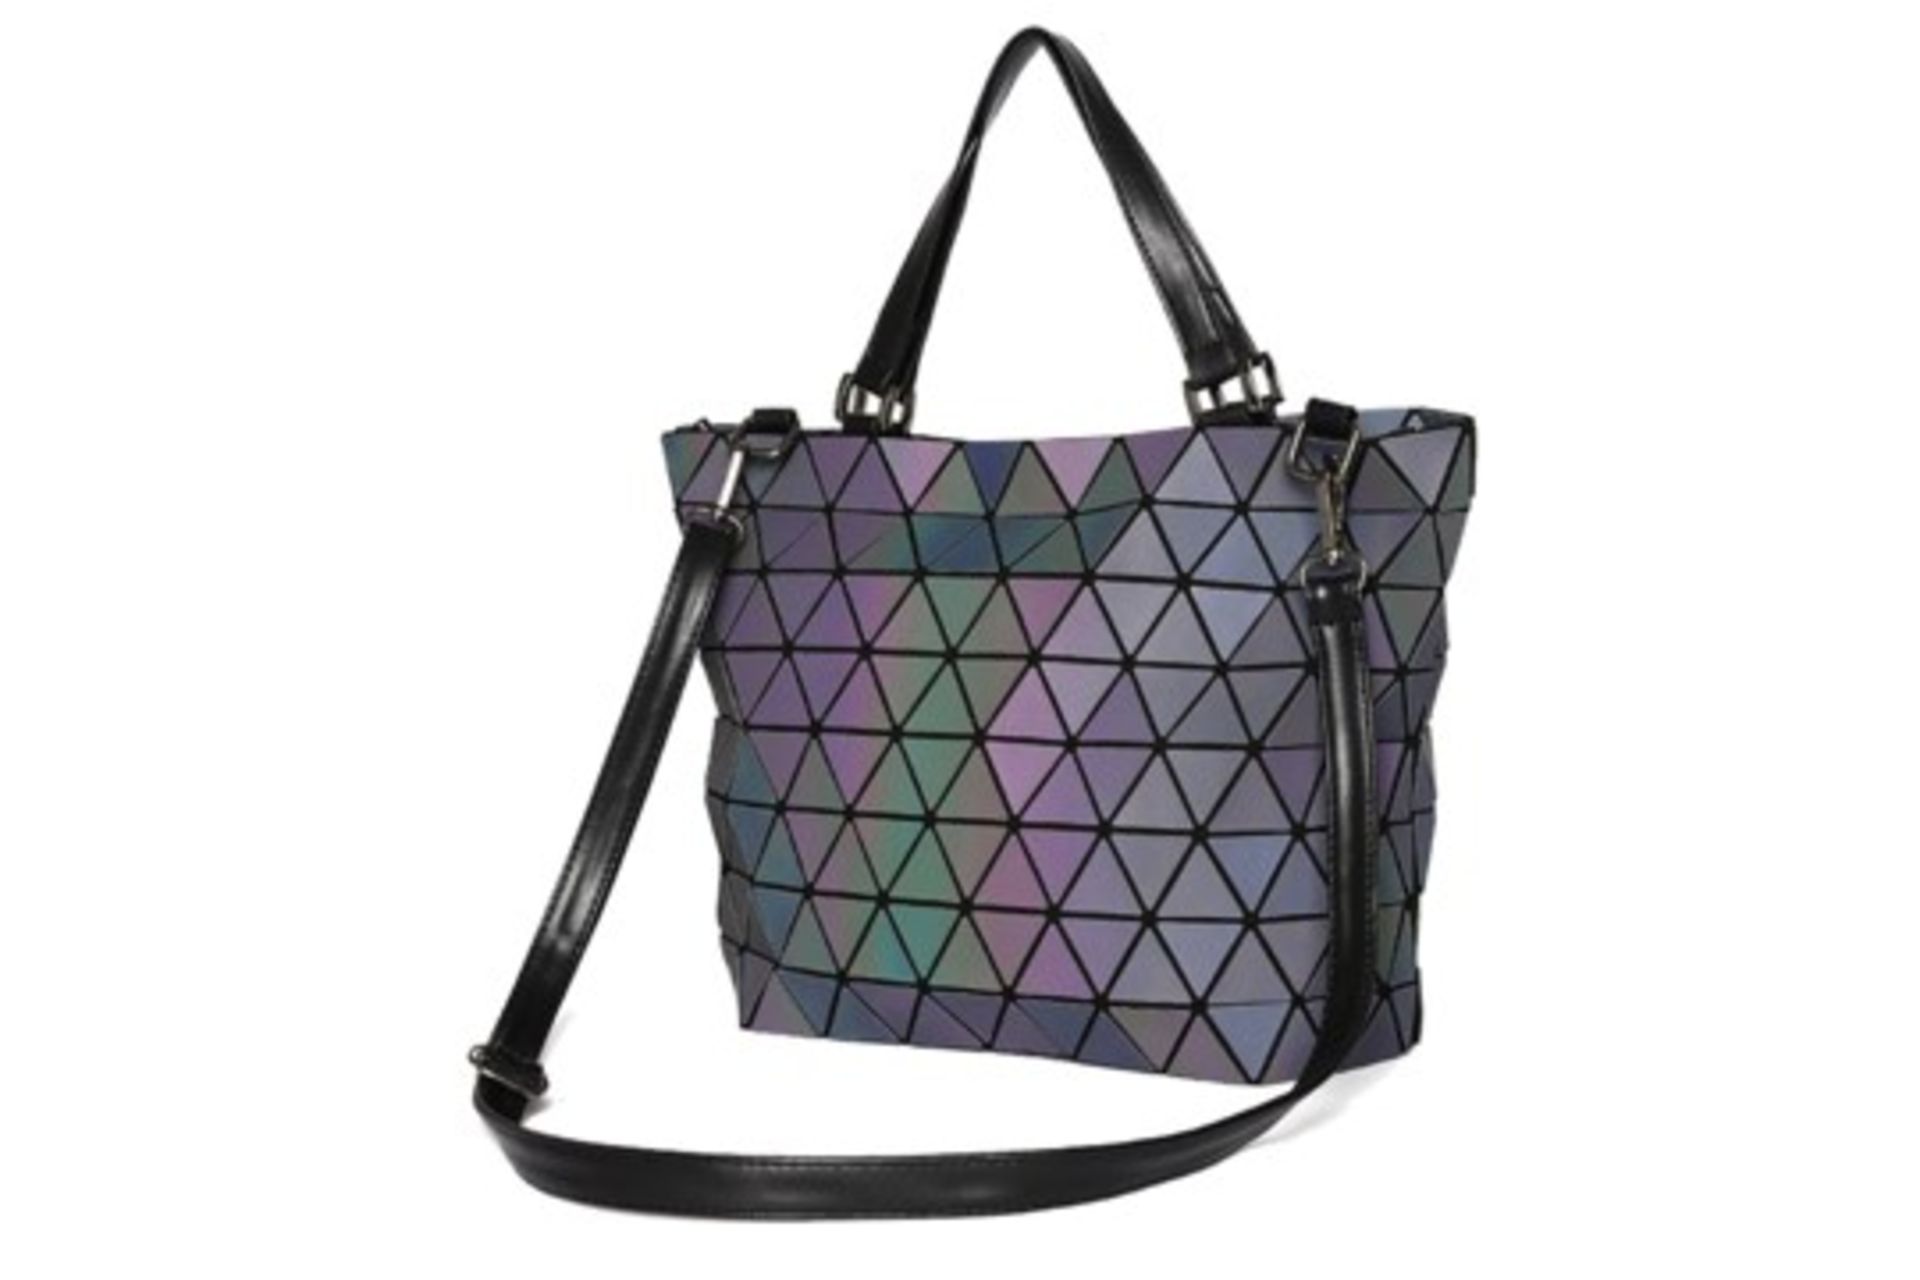 Brand New Women's Coolives Radient Handle Tote Bag in Purple RRP £49.99